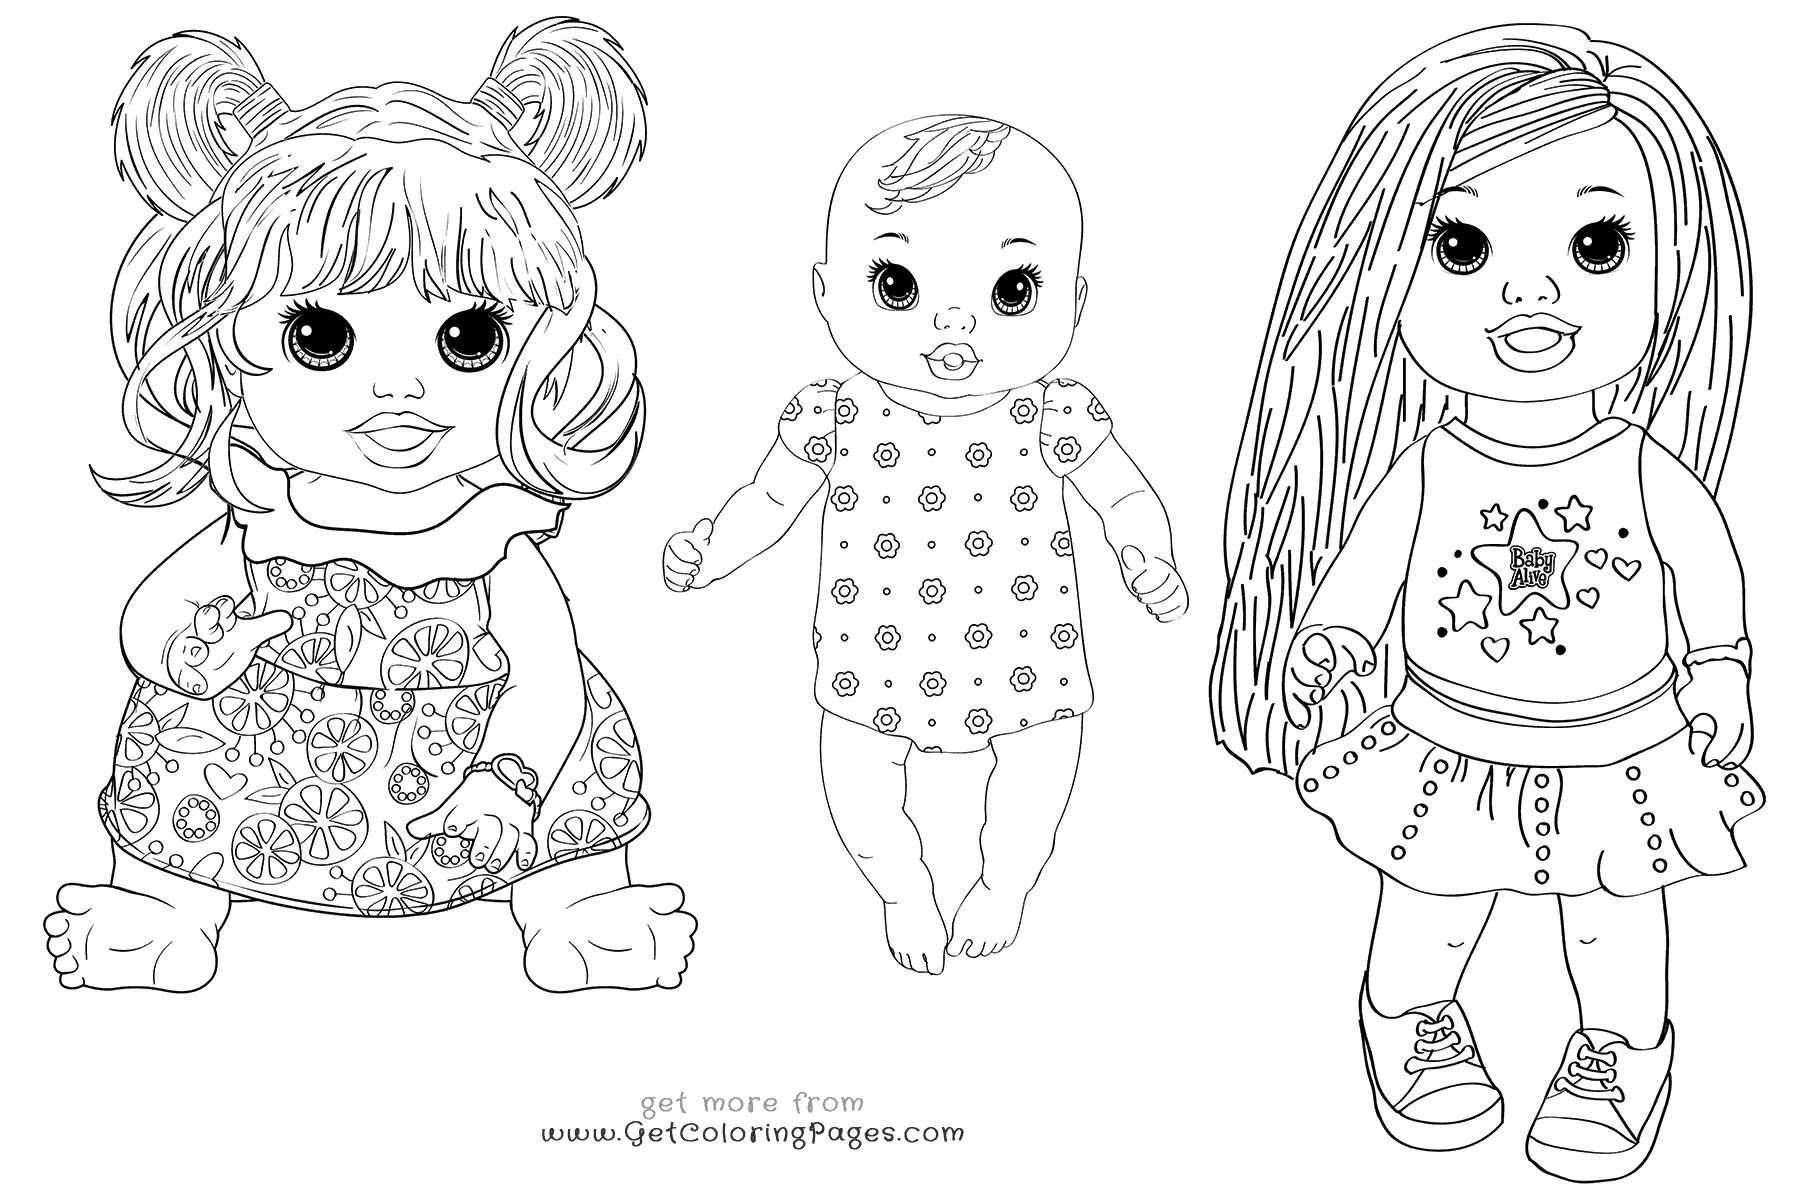 Coloring doll for children 5-6 years old